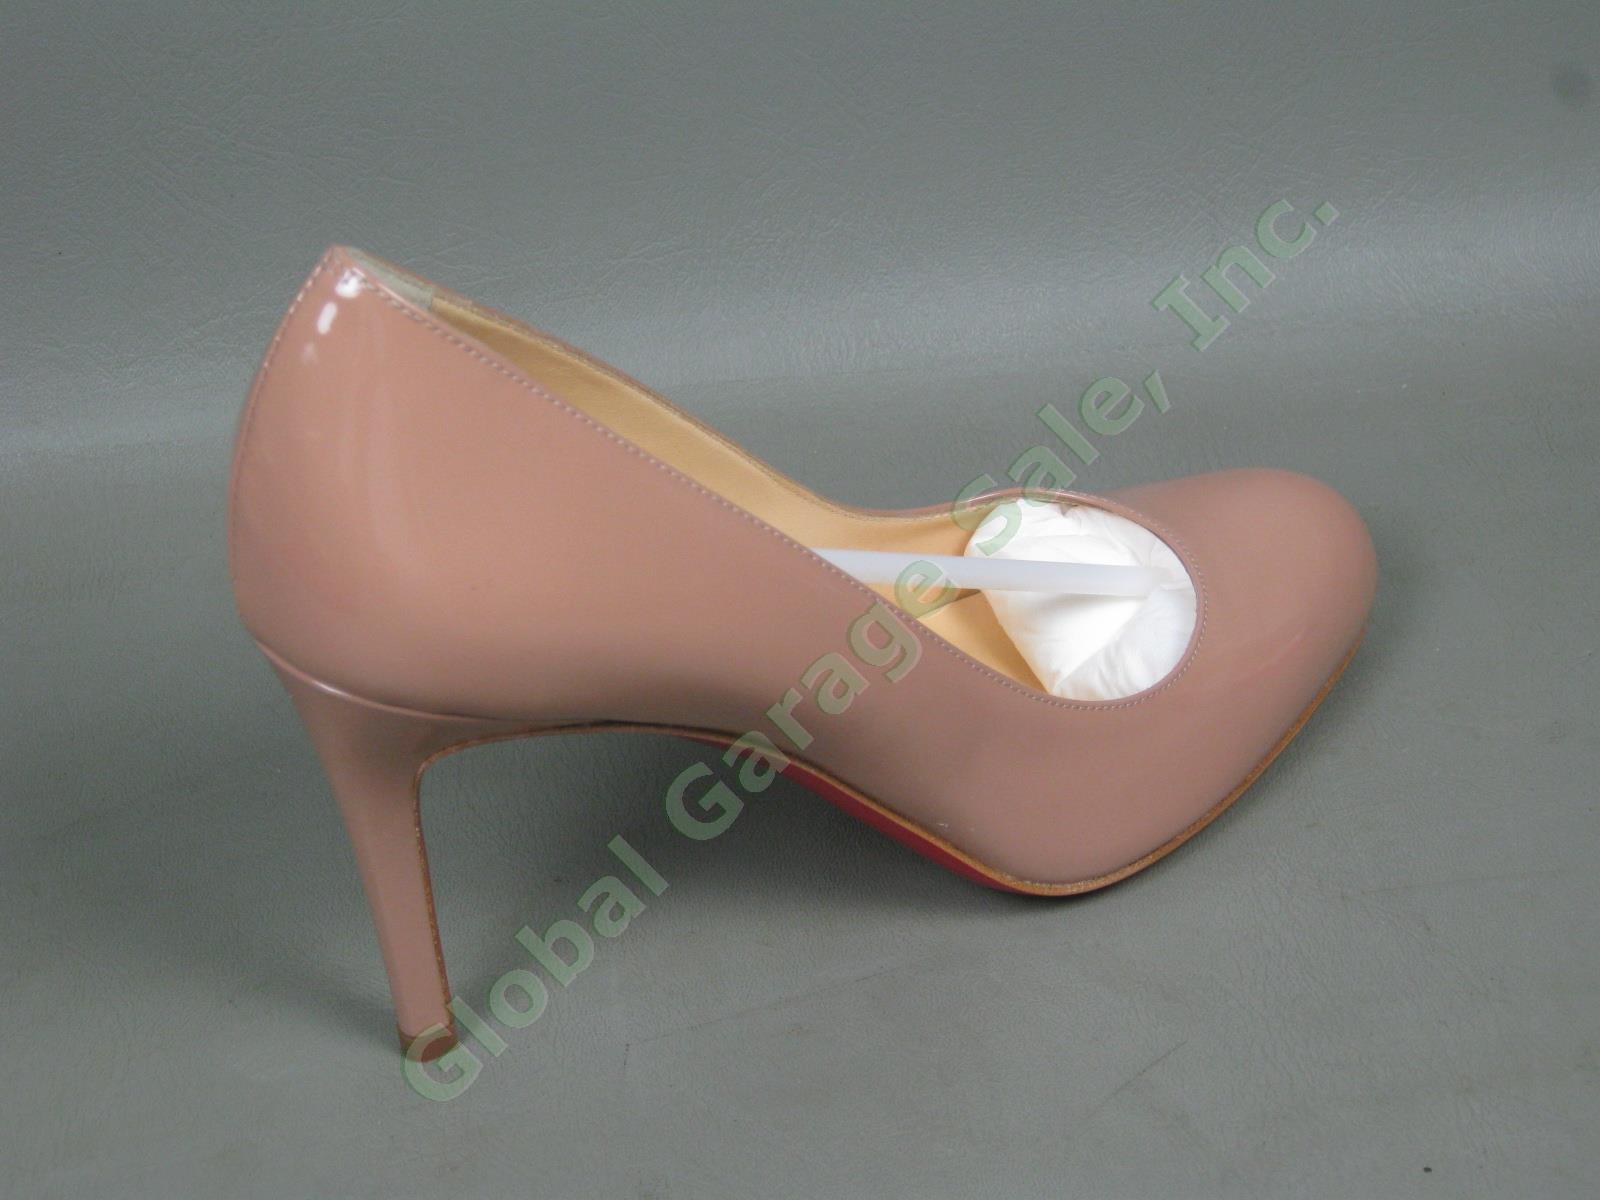 NEW Christian Louboutin Nude Simple Patent Calf Leather Pump 90mm Heel 37.5/7.5 5